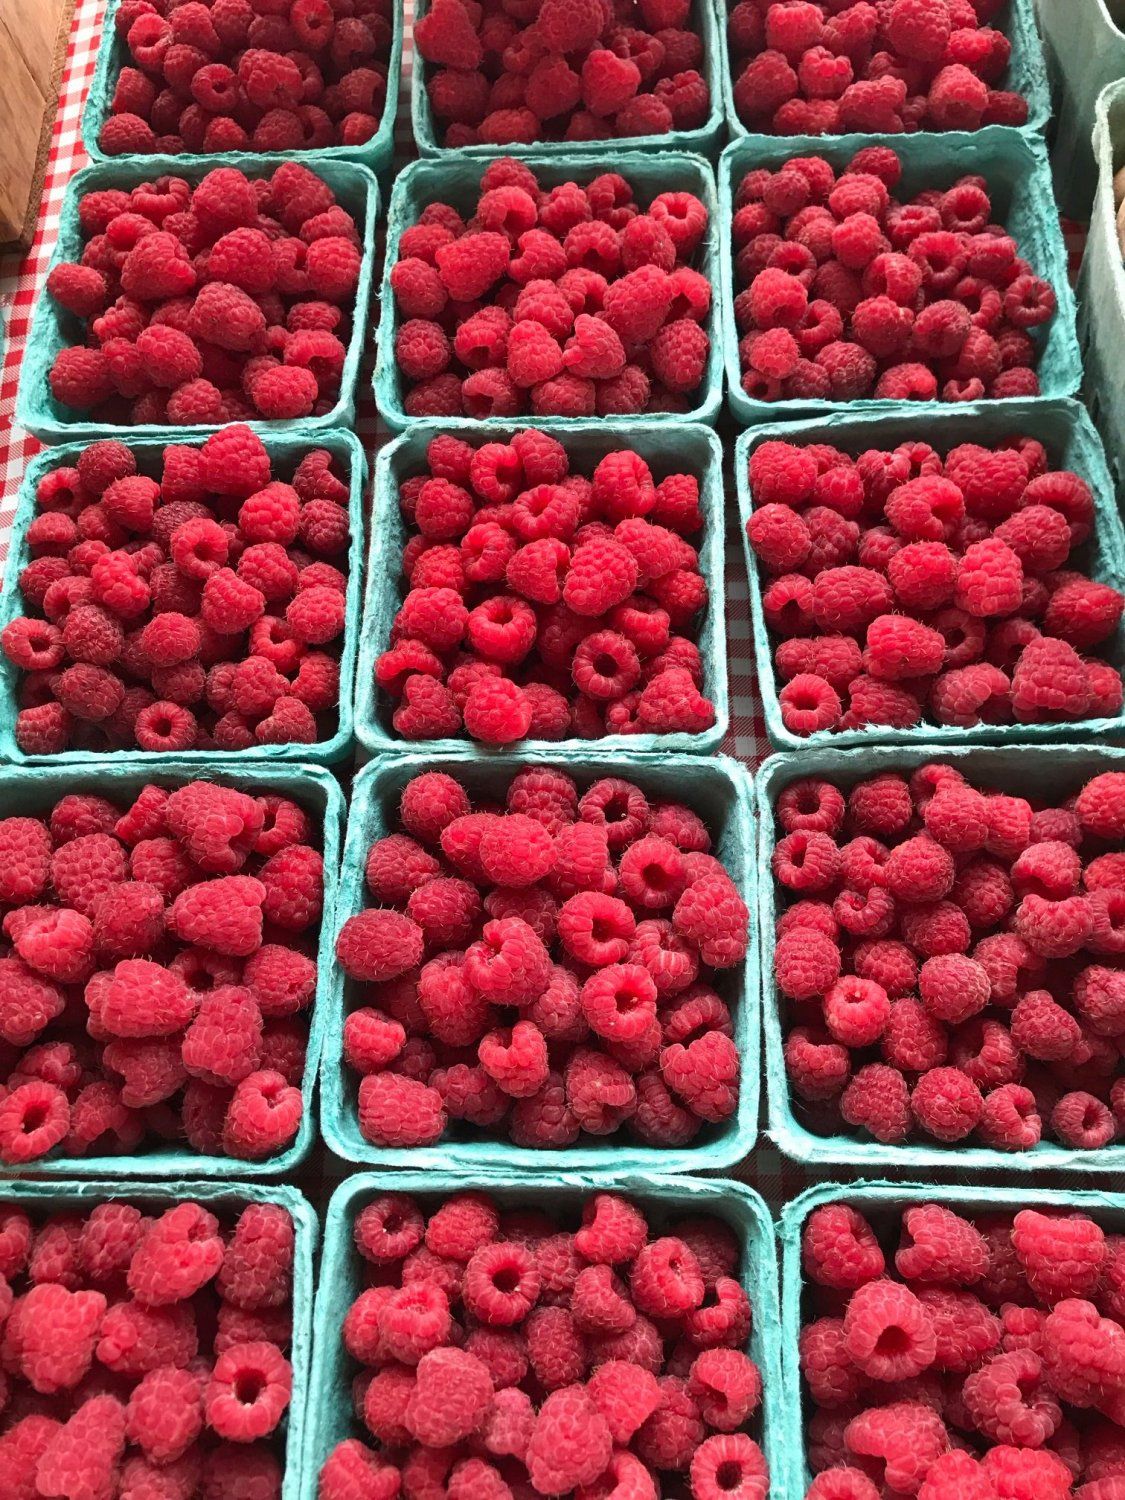 Previous Happening: Raspberry Time Again!